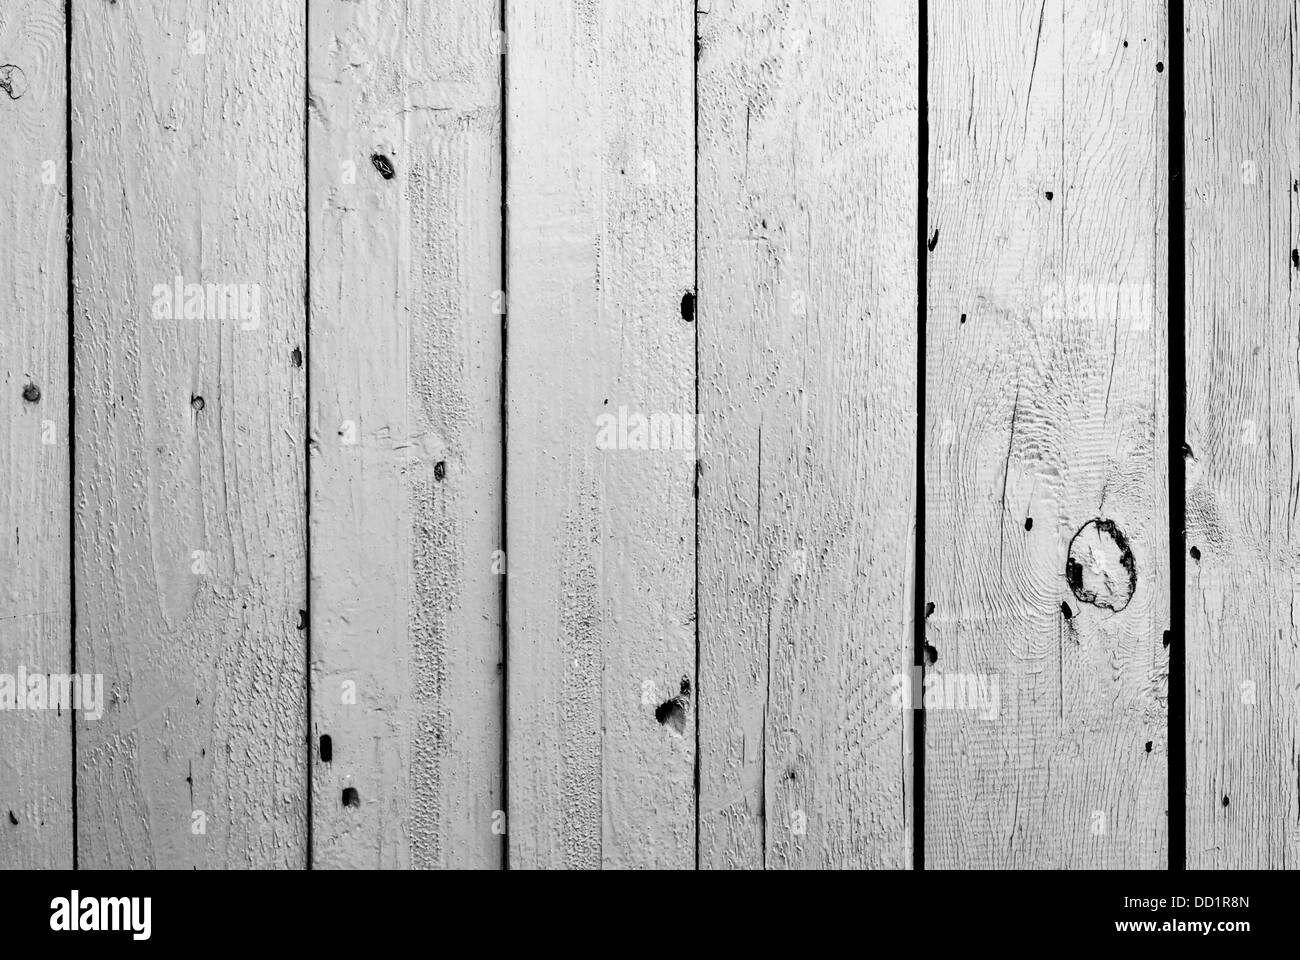 old black and white color wooden fence background Stock Photo